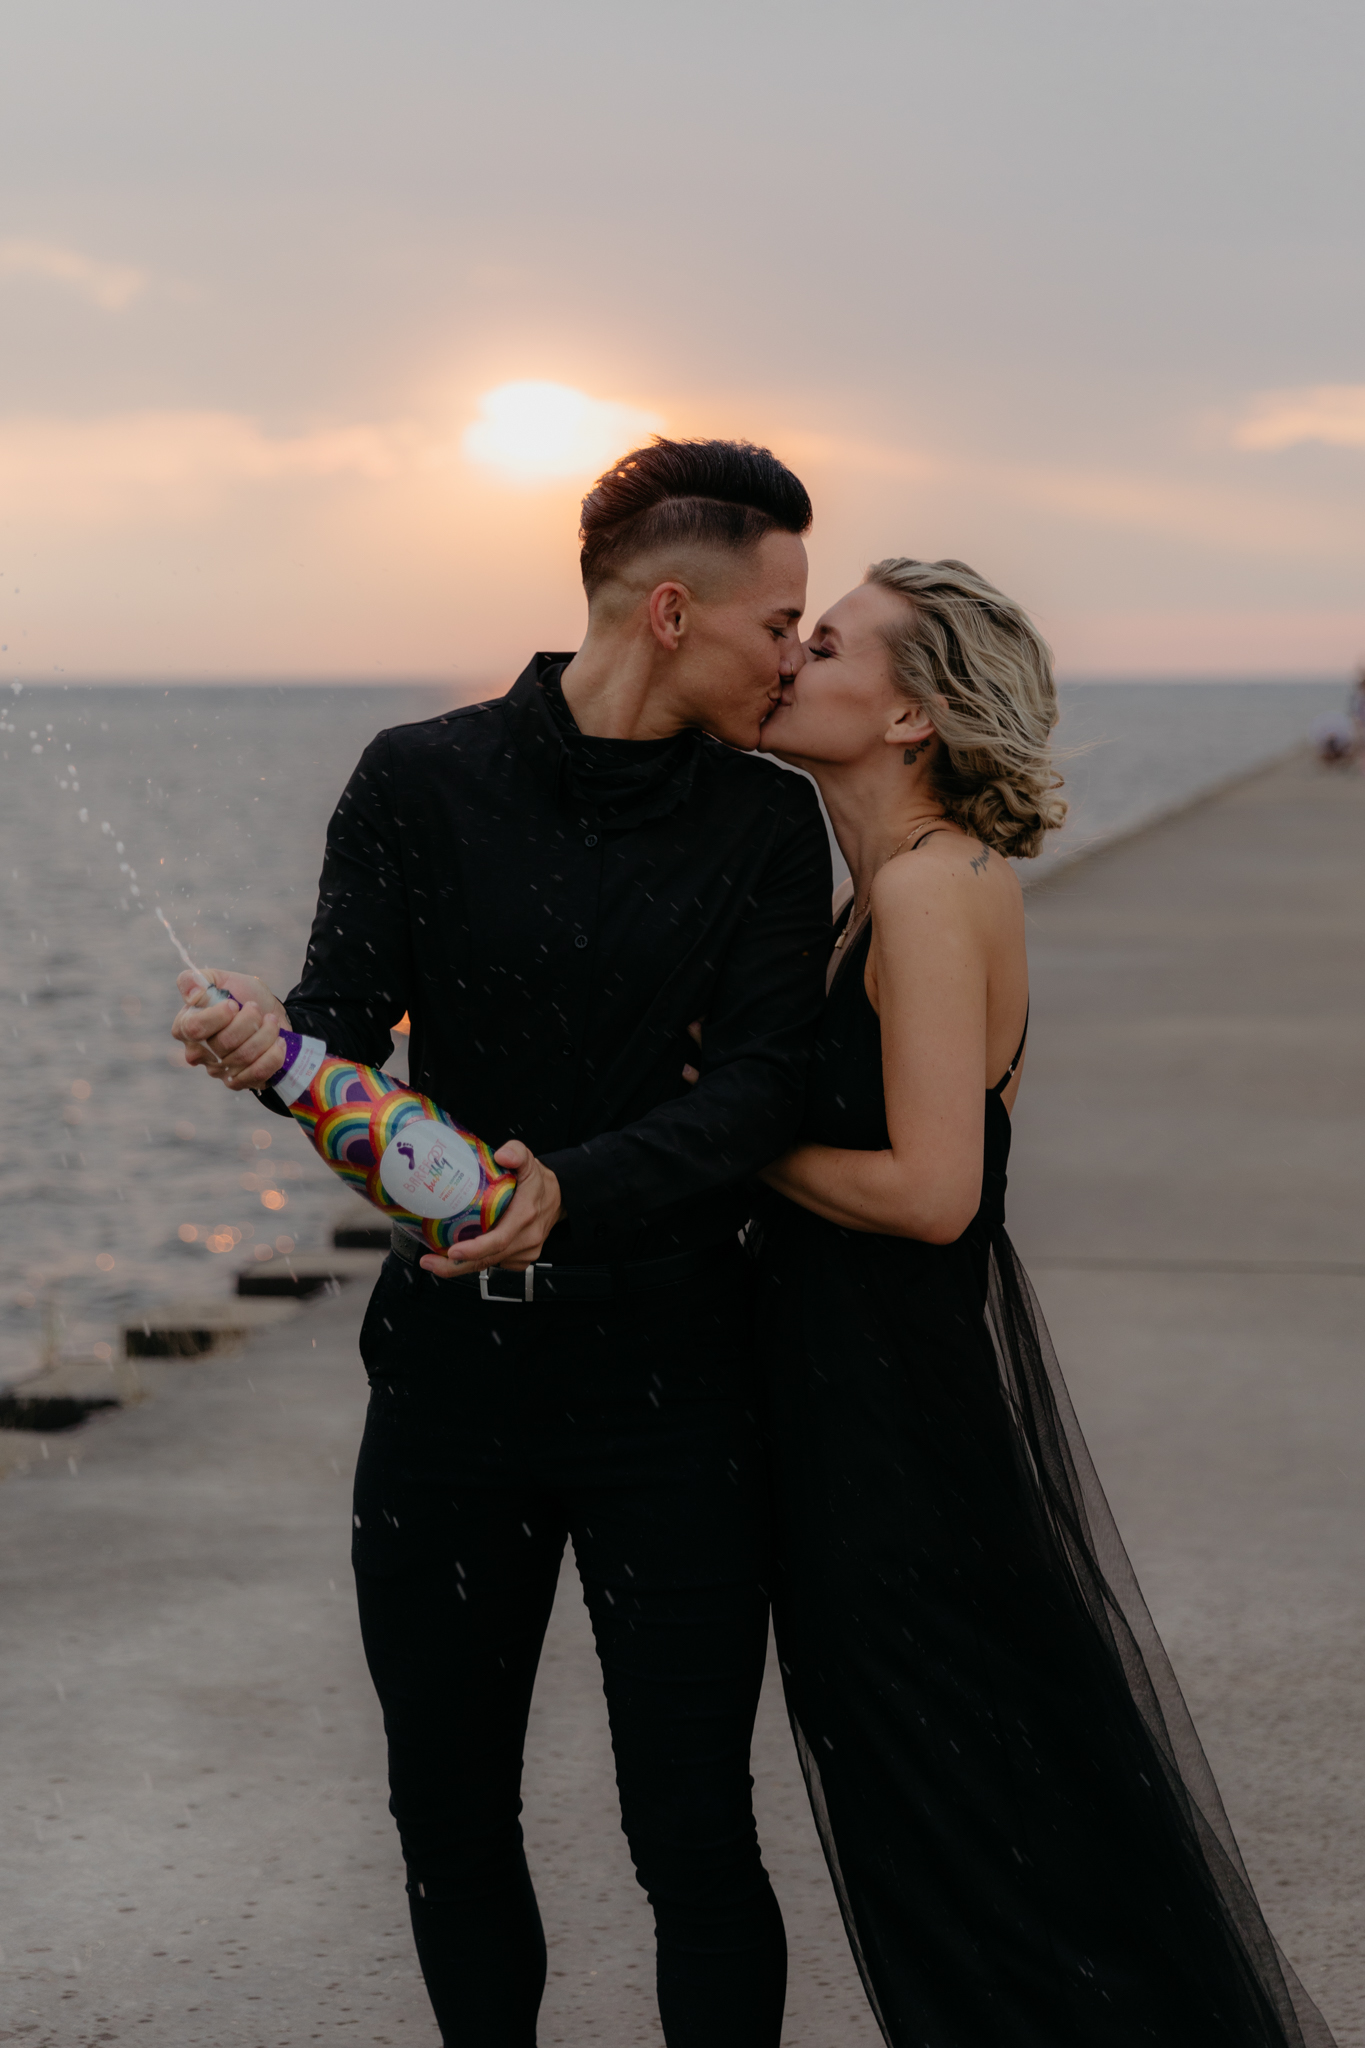 This LGBTQ elopement has the moodiest vibes